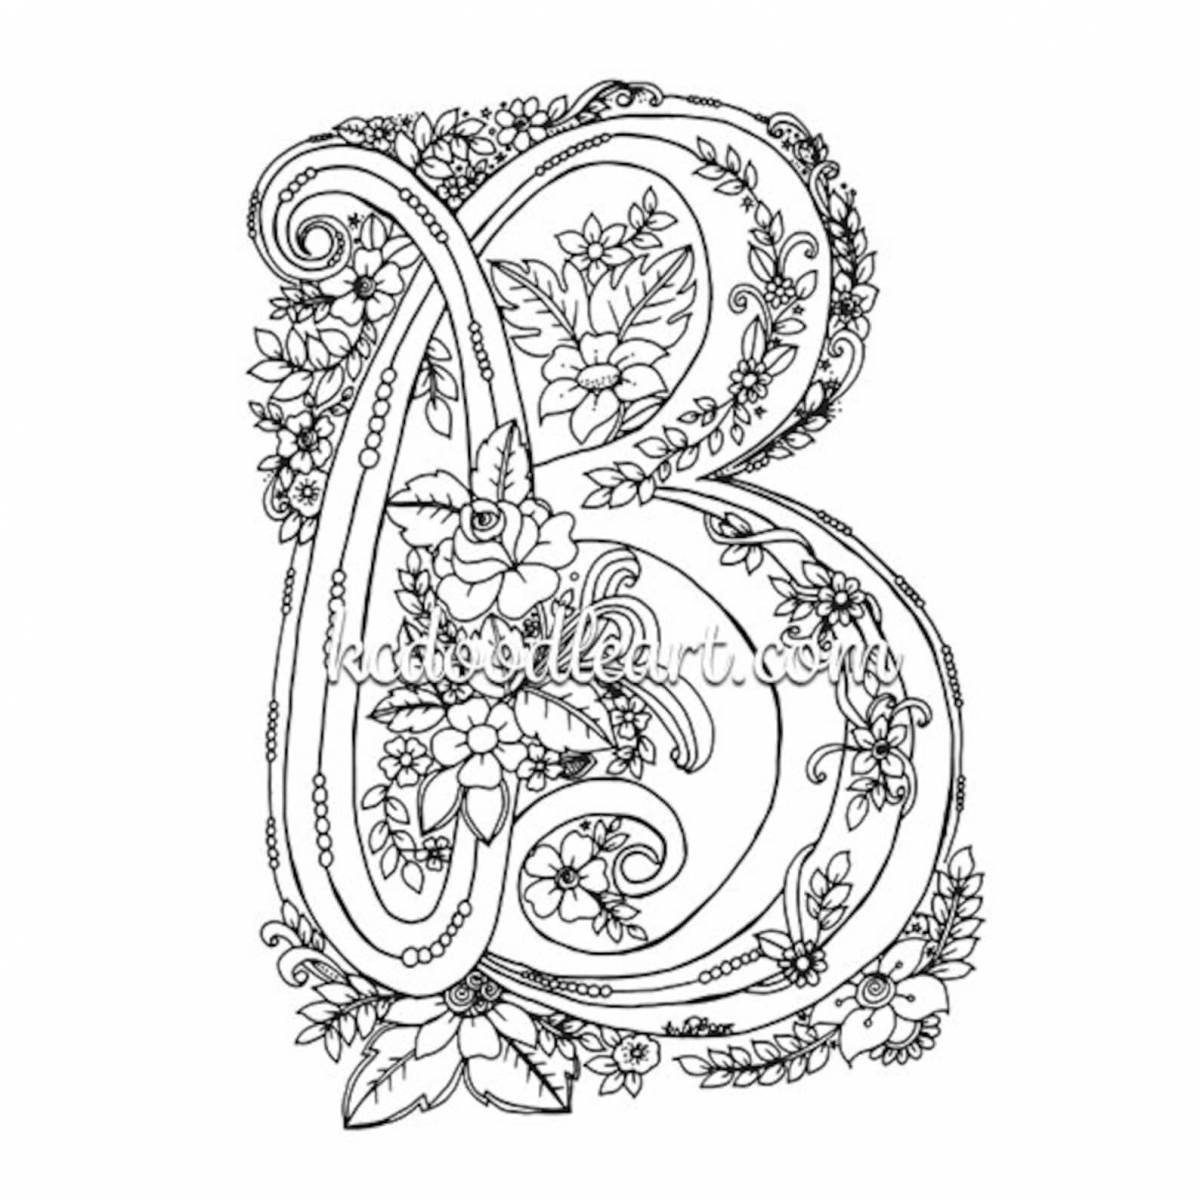 The initial letter of an outstanding coloring page